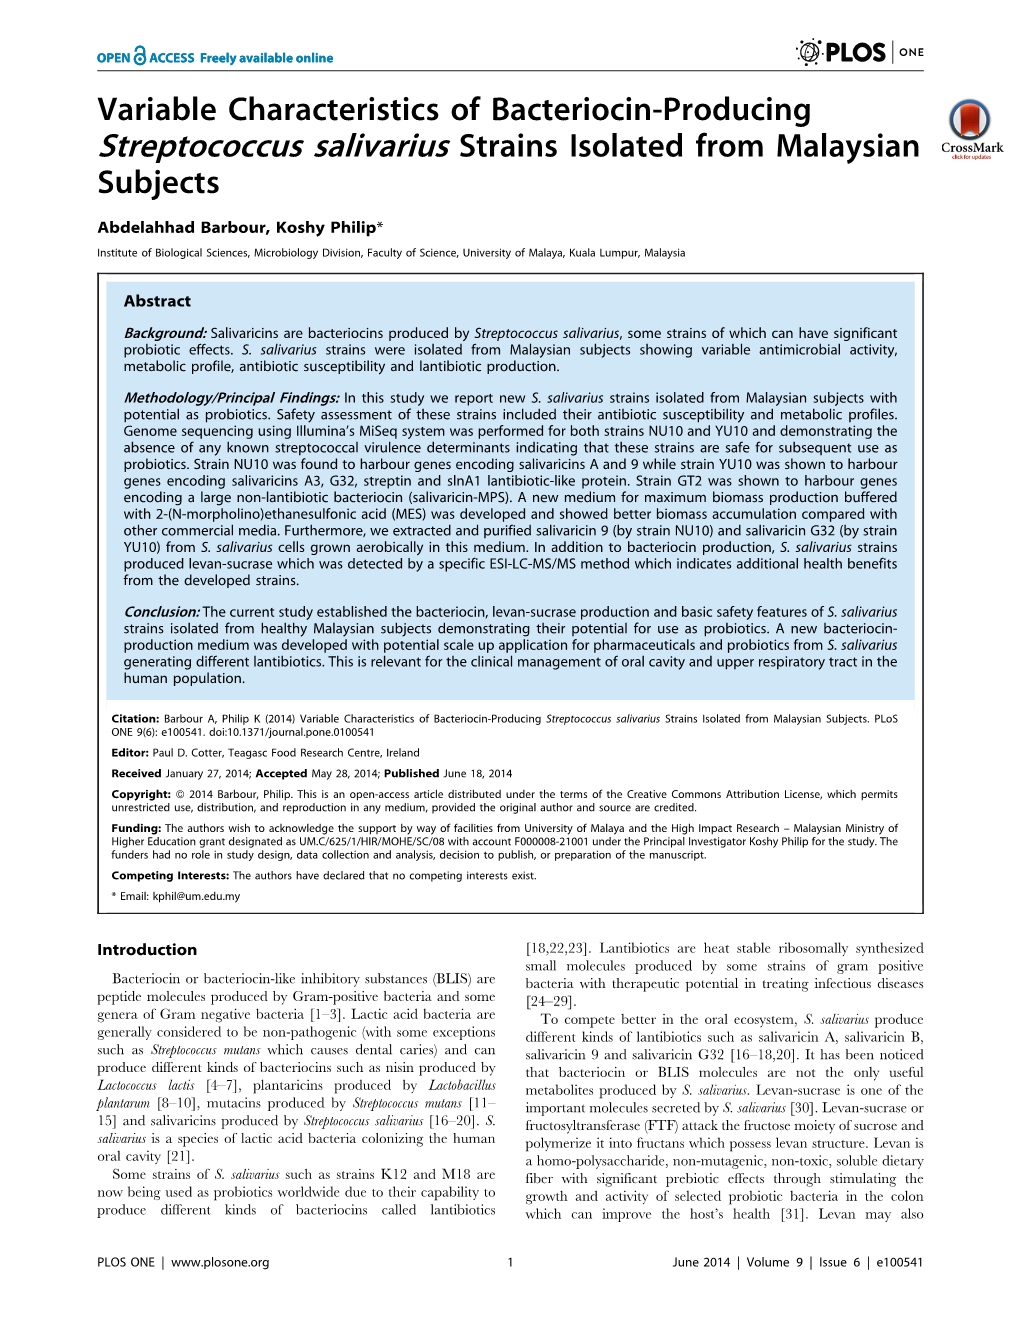 Variable Characteristics of Bacteriocin-Producing Streptococcus Salivarius Strains Isolated from Malaysian Subjects